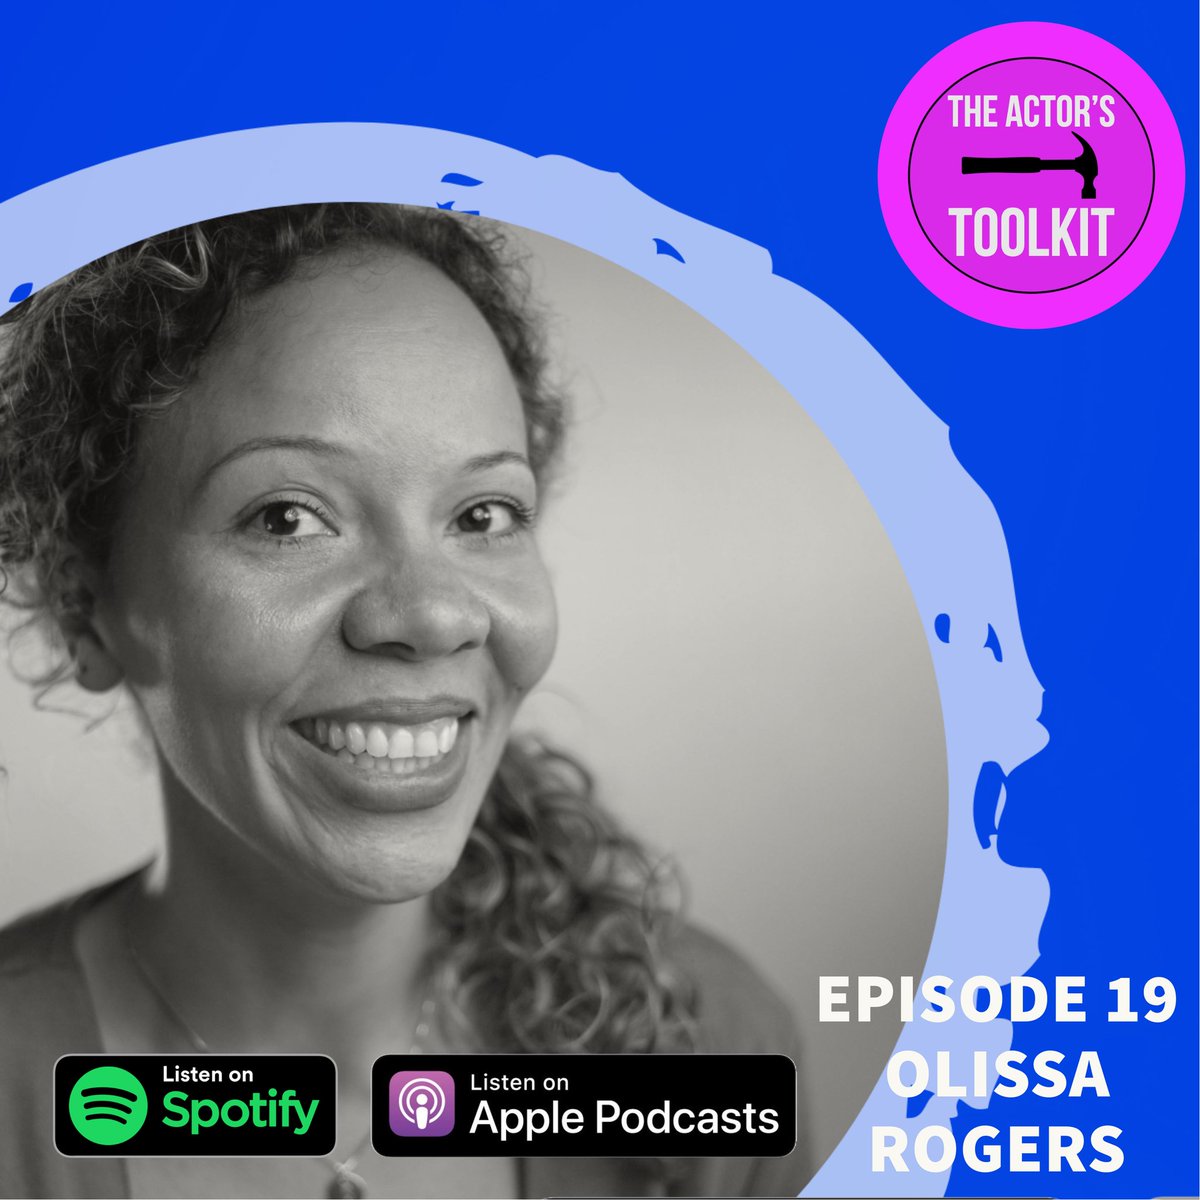 EPISODE 19 - OUT TOMORROW AT 9AM! On this week's episode of The Actor's Toolkit Podcast we interview the lovely OLISSA ROGERS (@OlissaRogers) about all things casting! You can listen from 9am wherever you get your podcasts! audereacademy.com